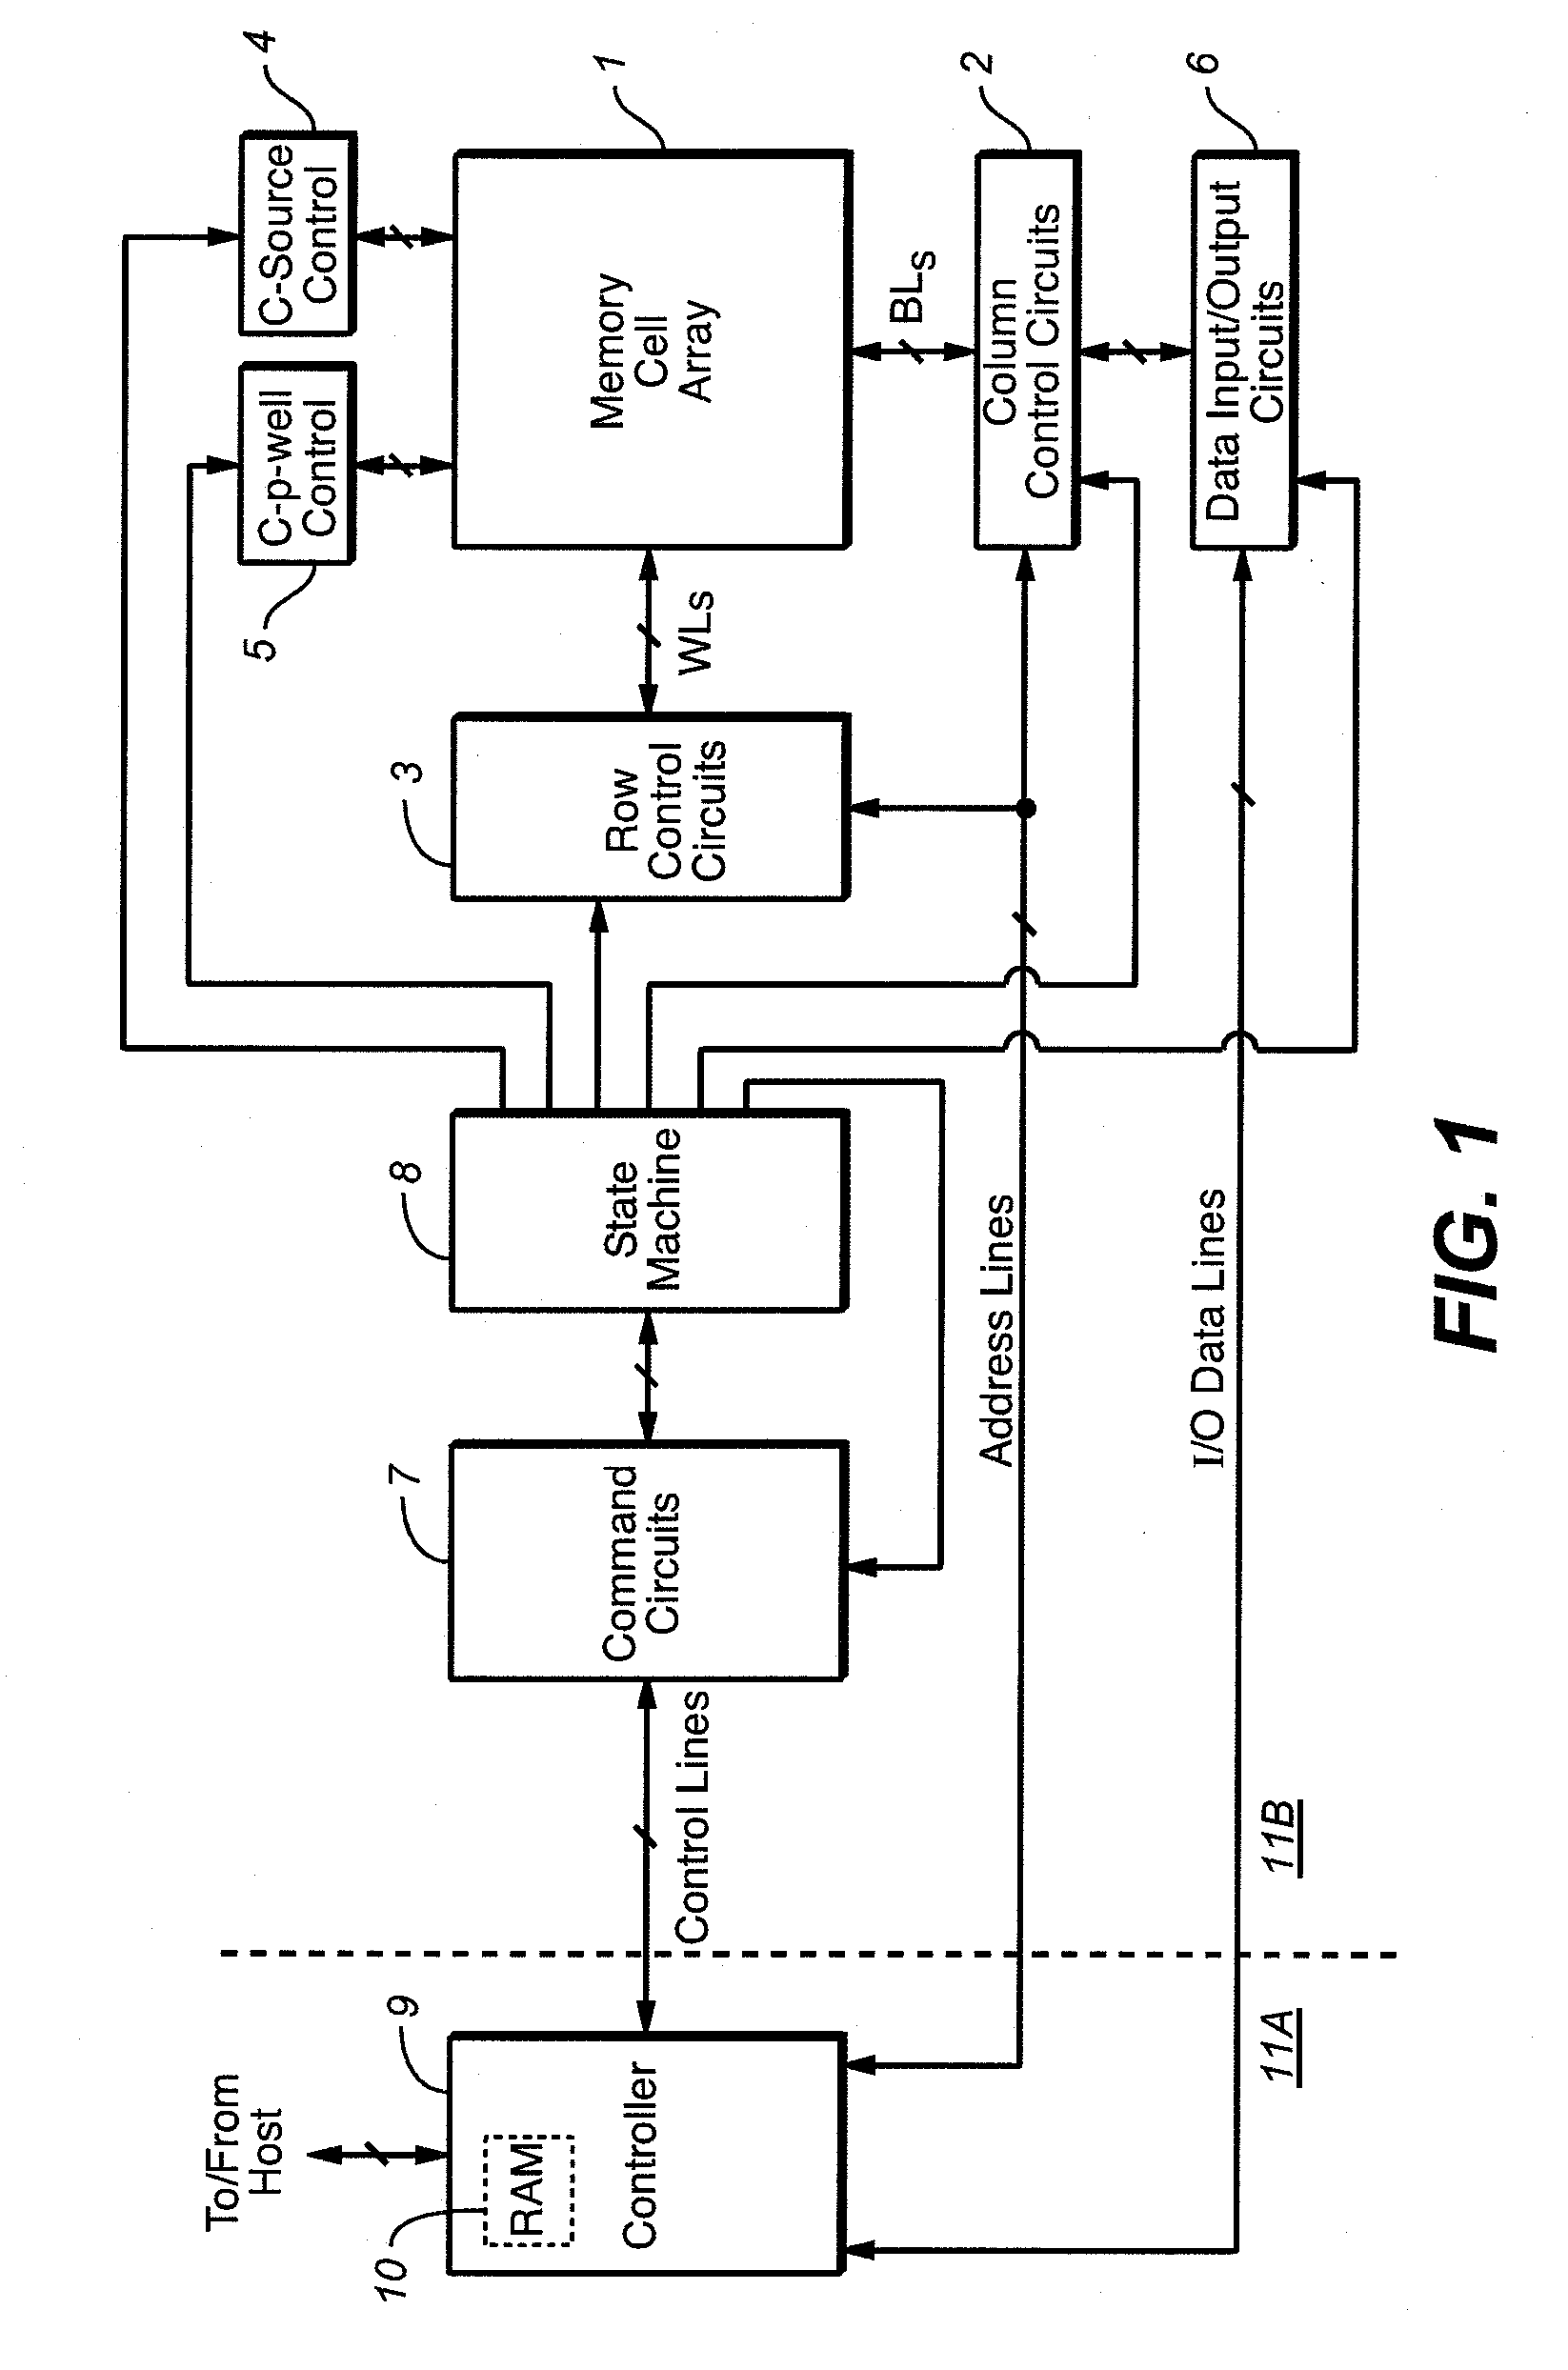 Self-boosting method with suppression of high lateral electric fields